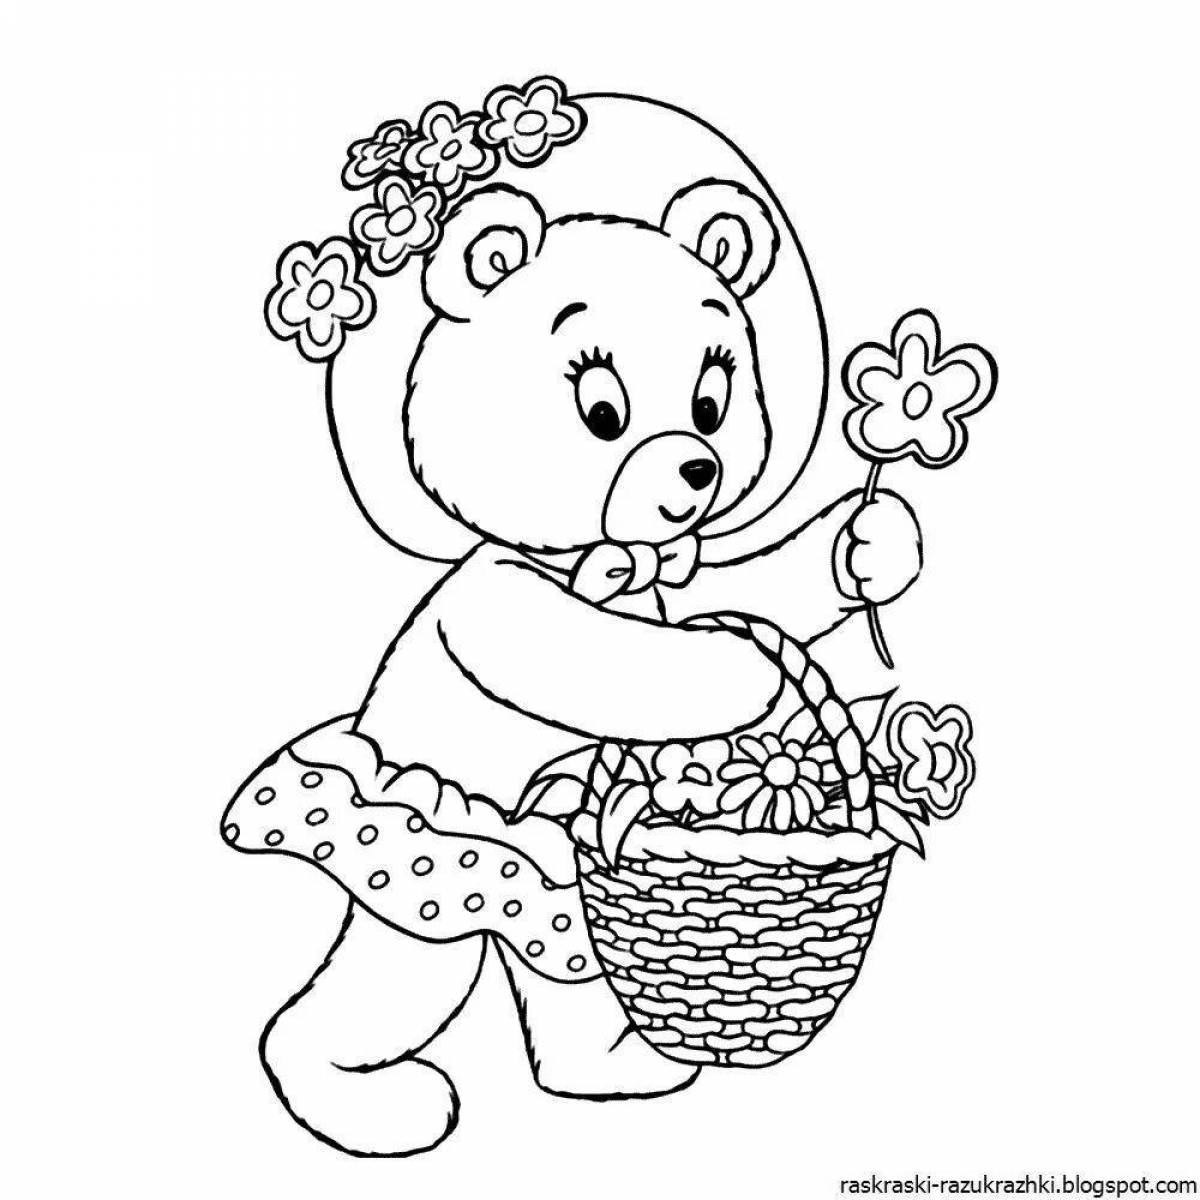 Fairy coloring bear for children 5-6 years old